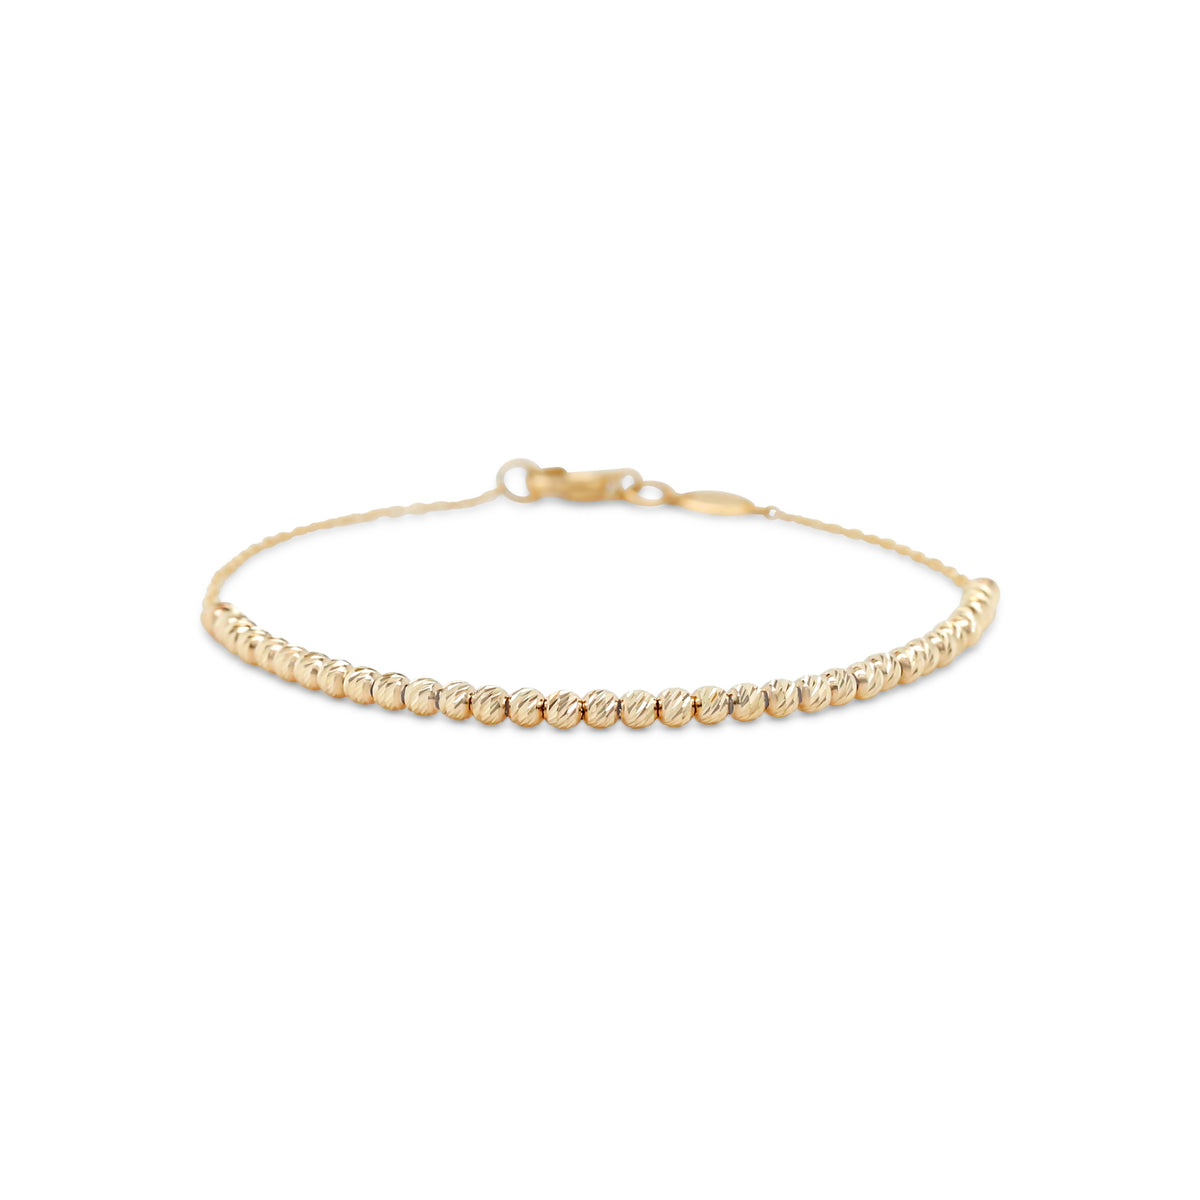 7 inch 14k yellow gold textured bead and chain bracelet